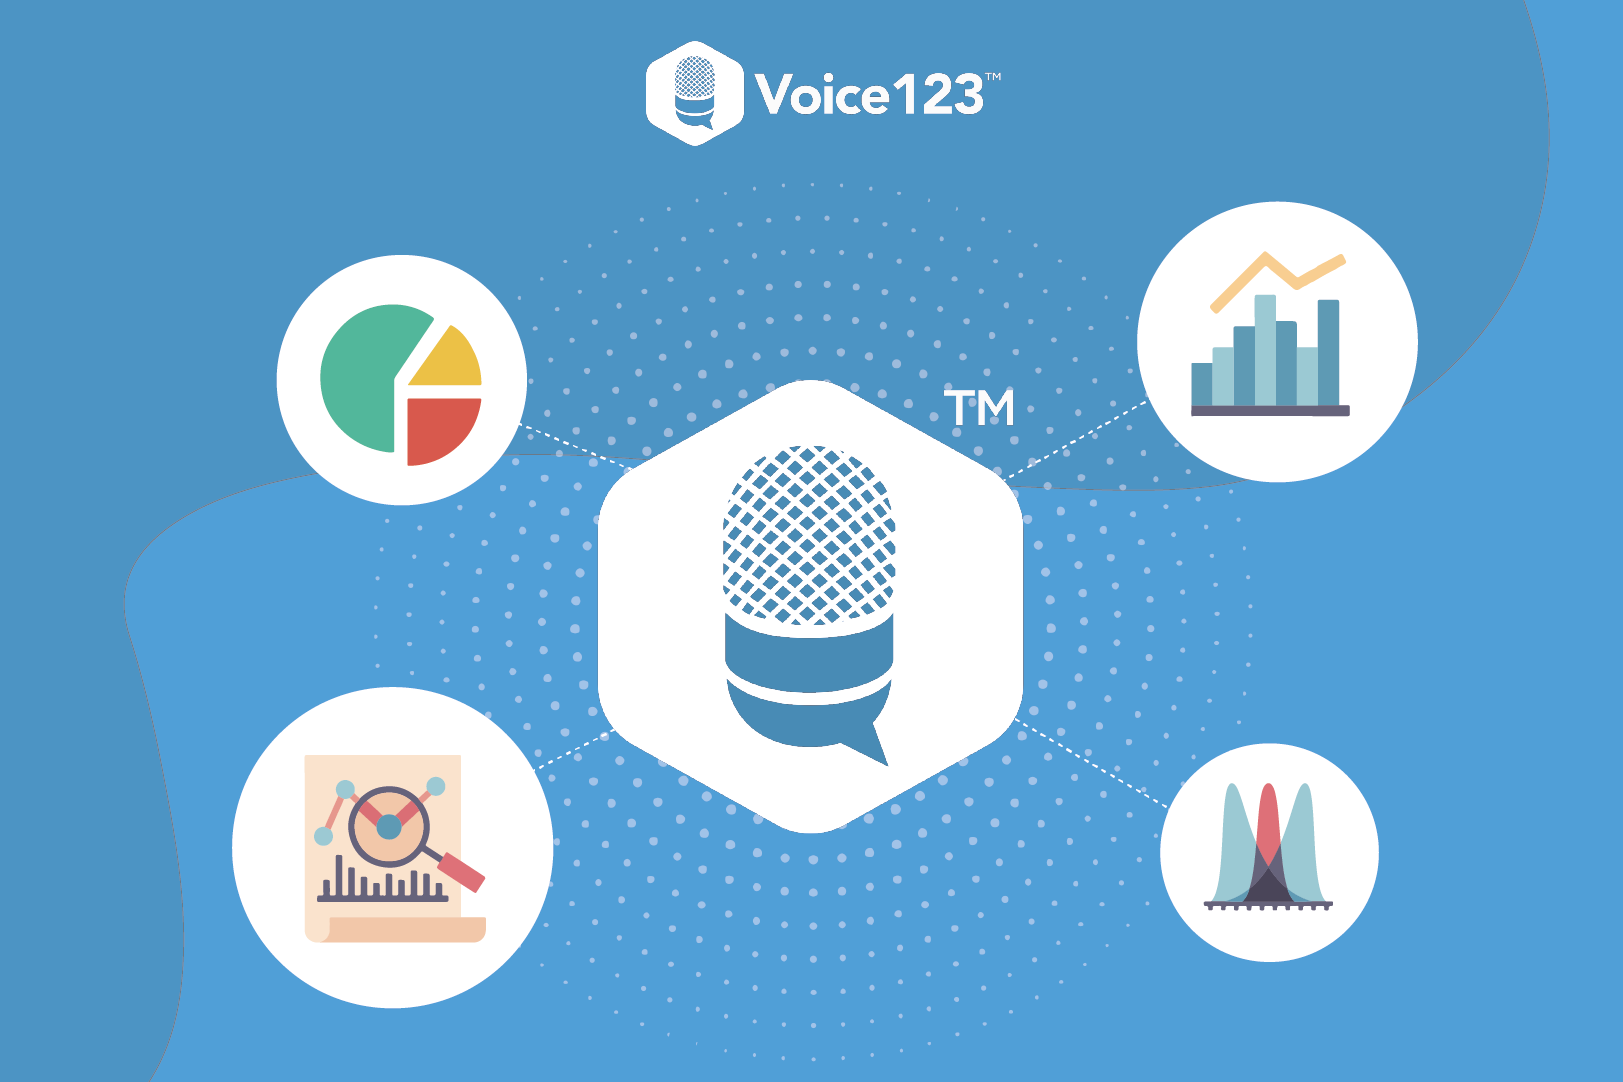 voice over insights from Voice123